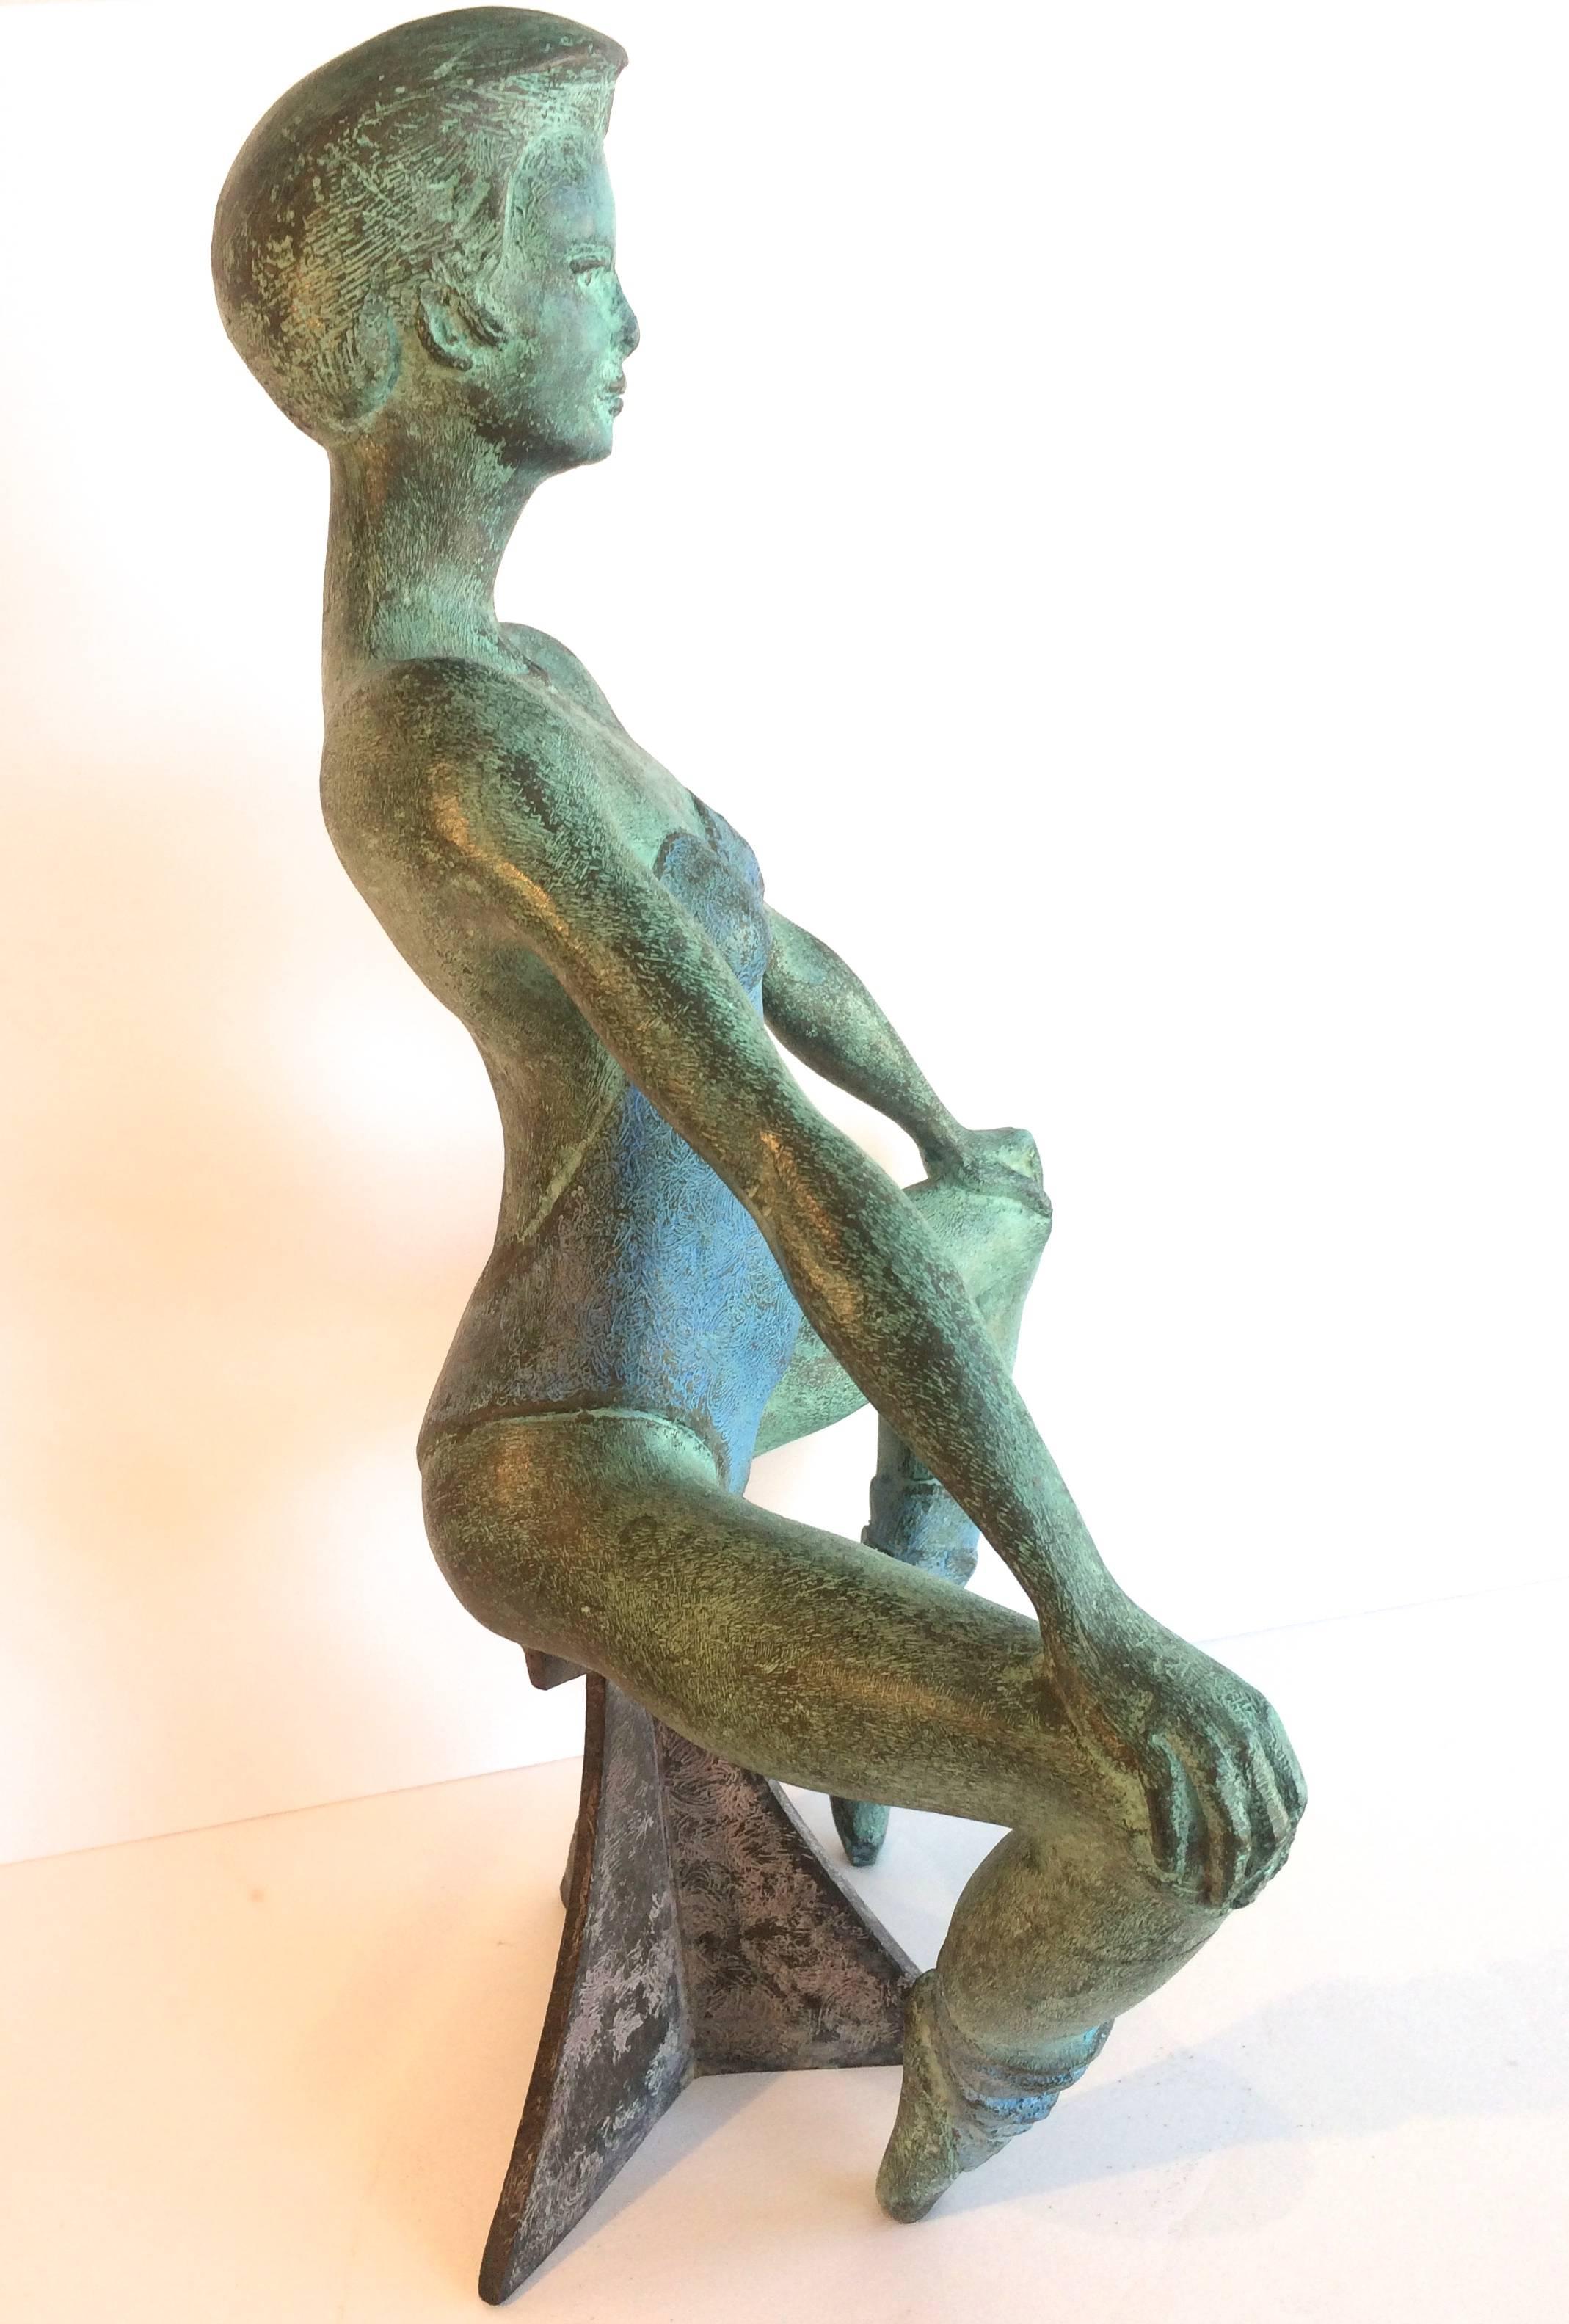 Chiara Ballerina Bronze Sculpture
Size: 18x12x7
Patinated bronze edition 1/7, signed.

Edition 1/7, from the artist collection.
Franco de Renzis was born in 1947 in Agnone Italy. He is a self-thought sculptor known for his expressionist figurative